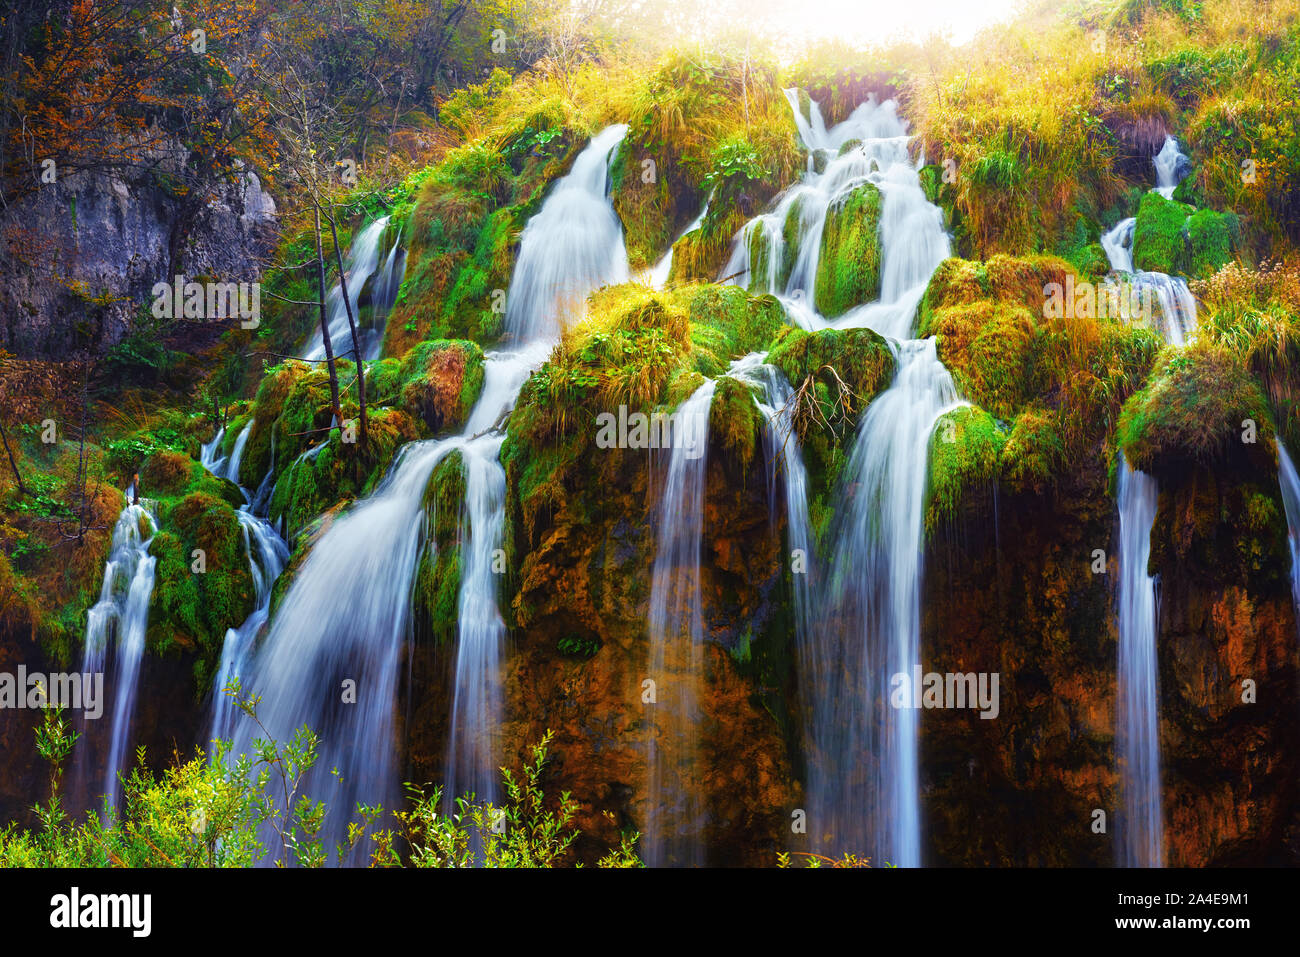 Water flows of amazing waterfall in Plitvice lakes. Plitvice National Park, Croatia. Landscape photography Stock Photo